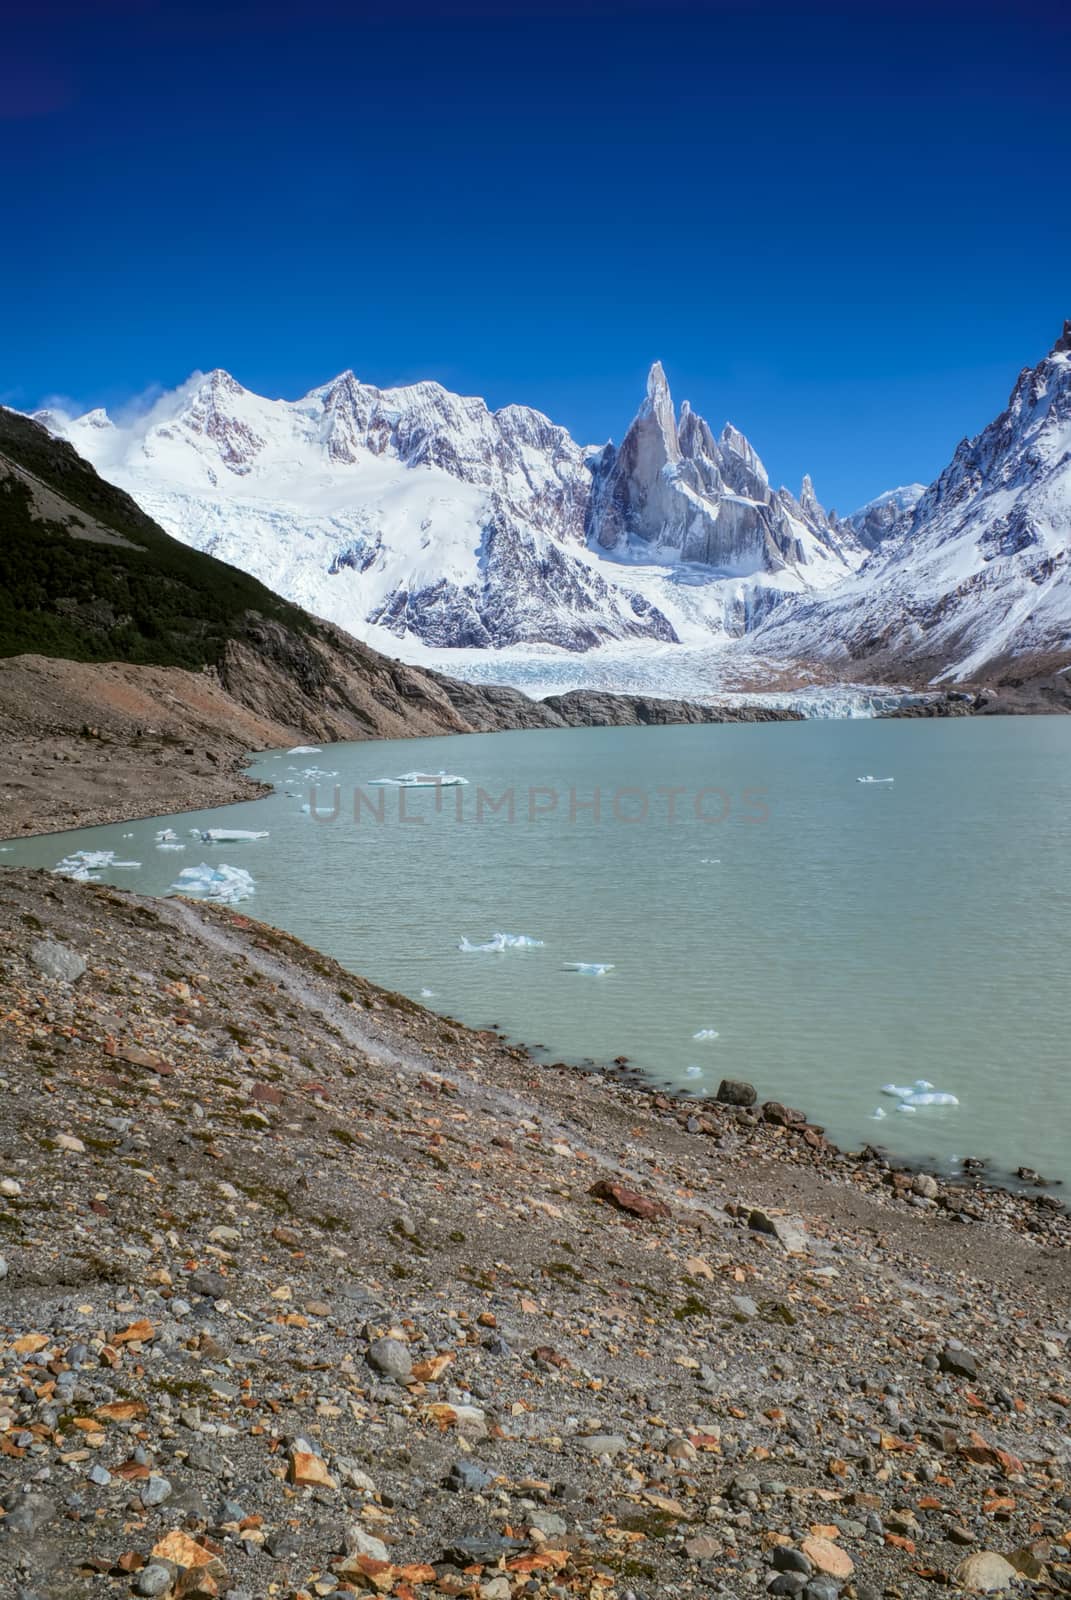 Picturesque view of rocky shore in Los Glaciares National Park